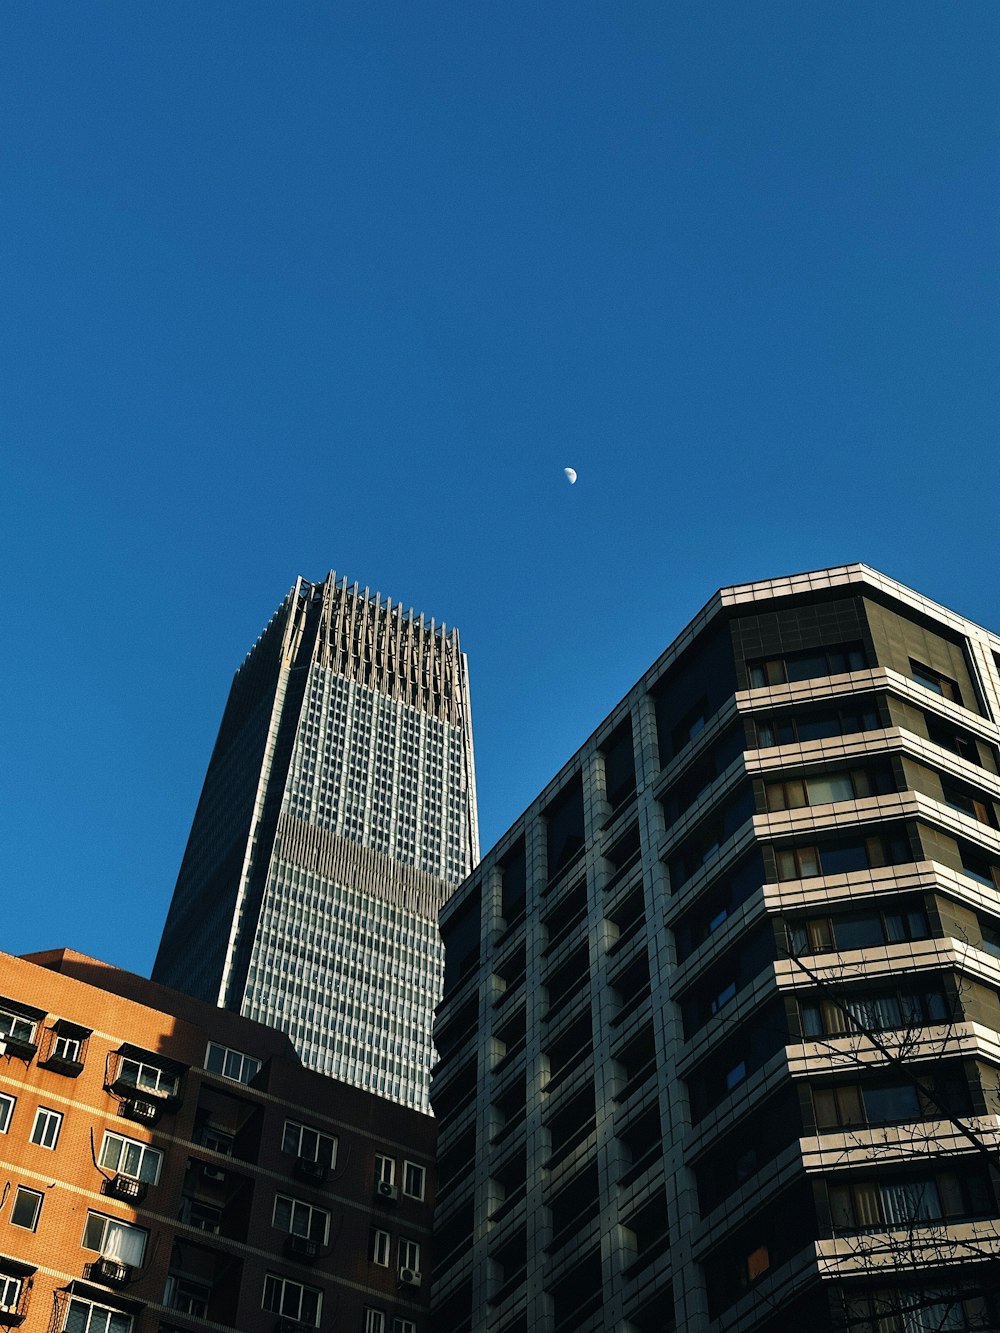 a clear blue sky with a few buildings in the foreground